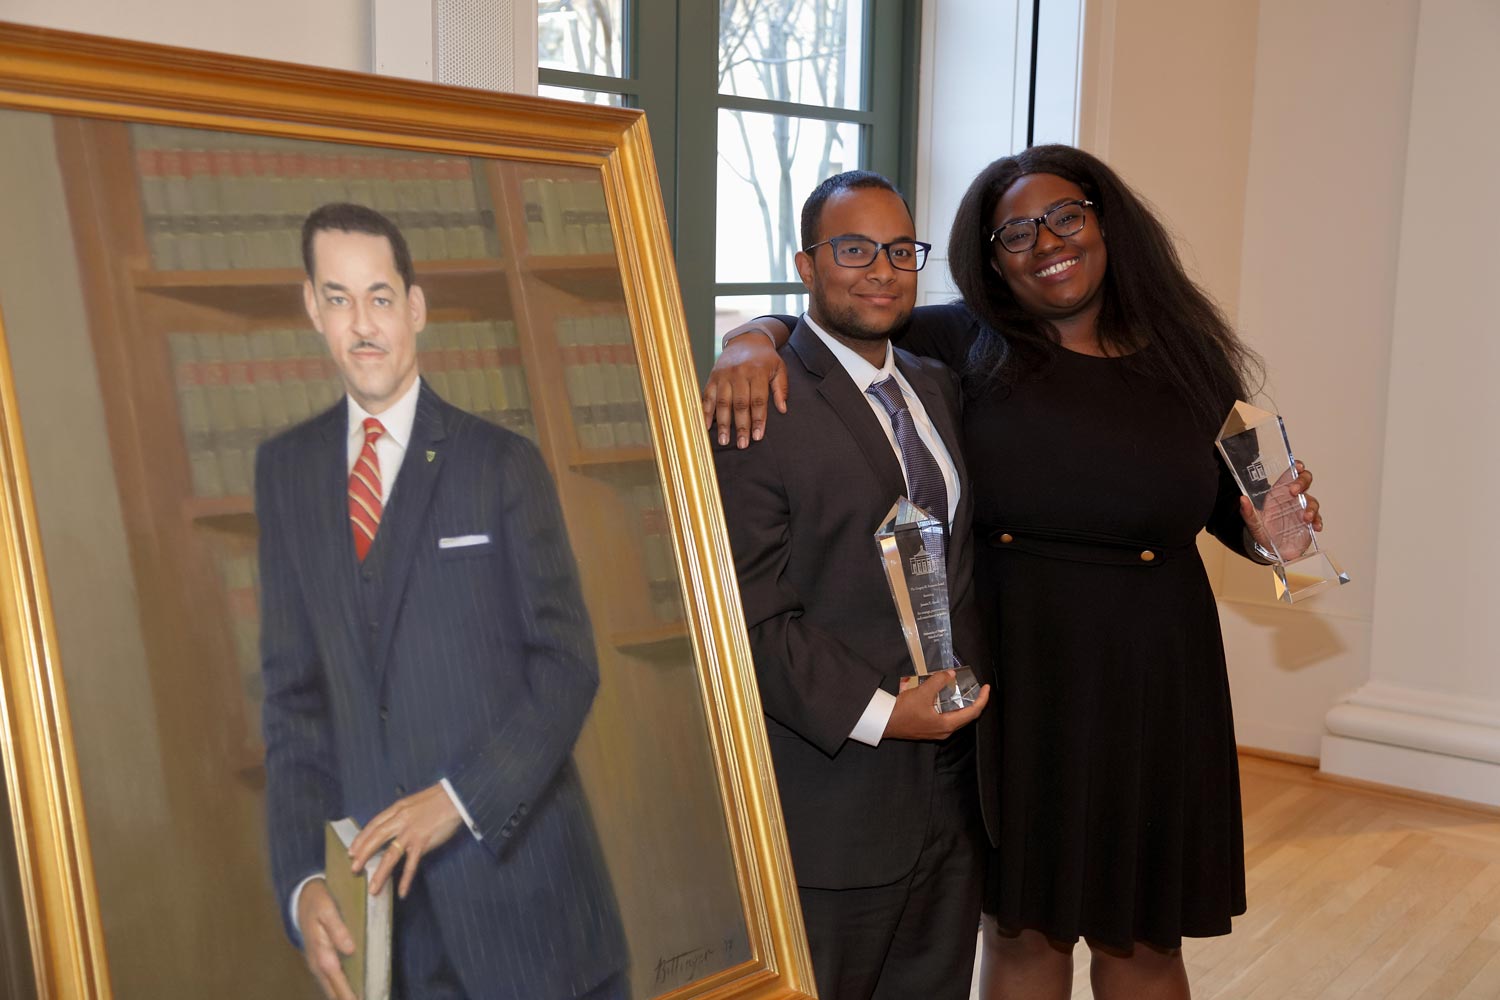 Jamaica Akande and Toccara Nelson stand next to a painting of Gregory H. Swanson holding their glass awards